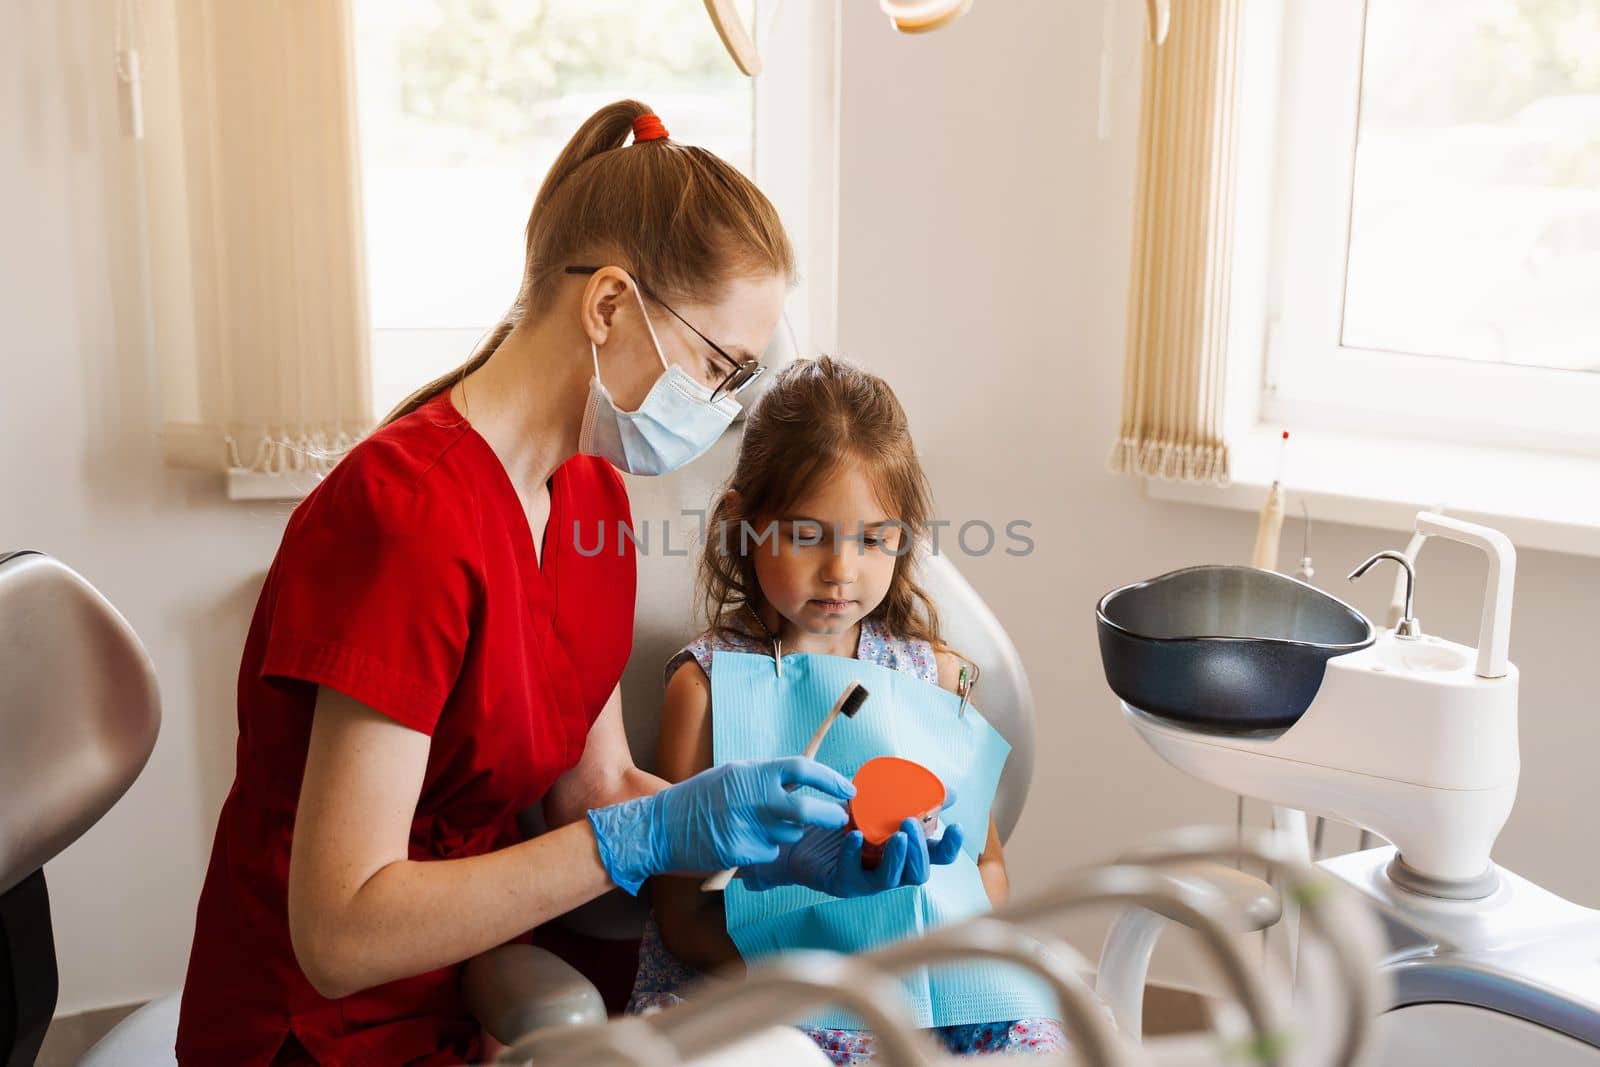 Dentist shows child how to properly use toothbrush for brush teeth. Jaw anatomical model teeth brushing. Pediatric dentist teaching oral hygiene lesson for kids in dentistry